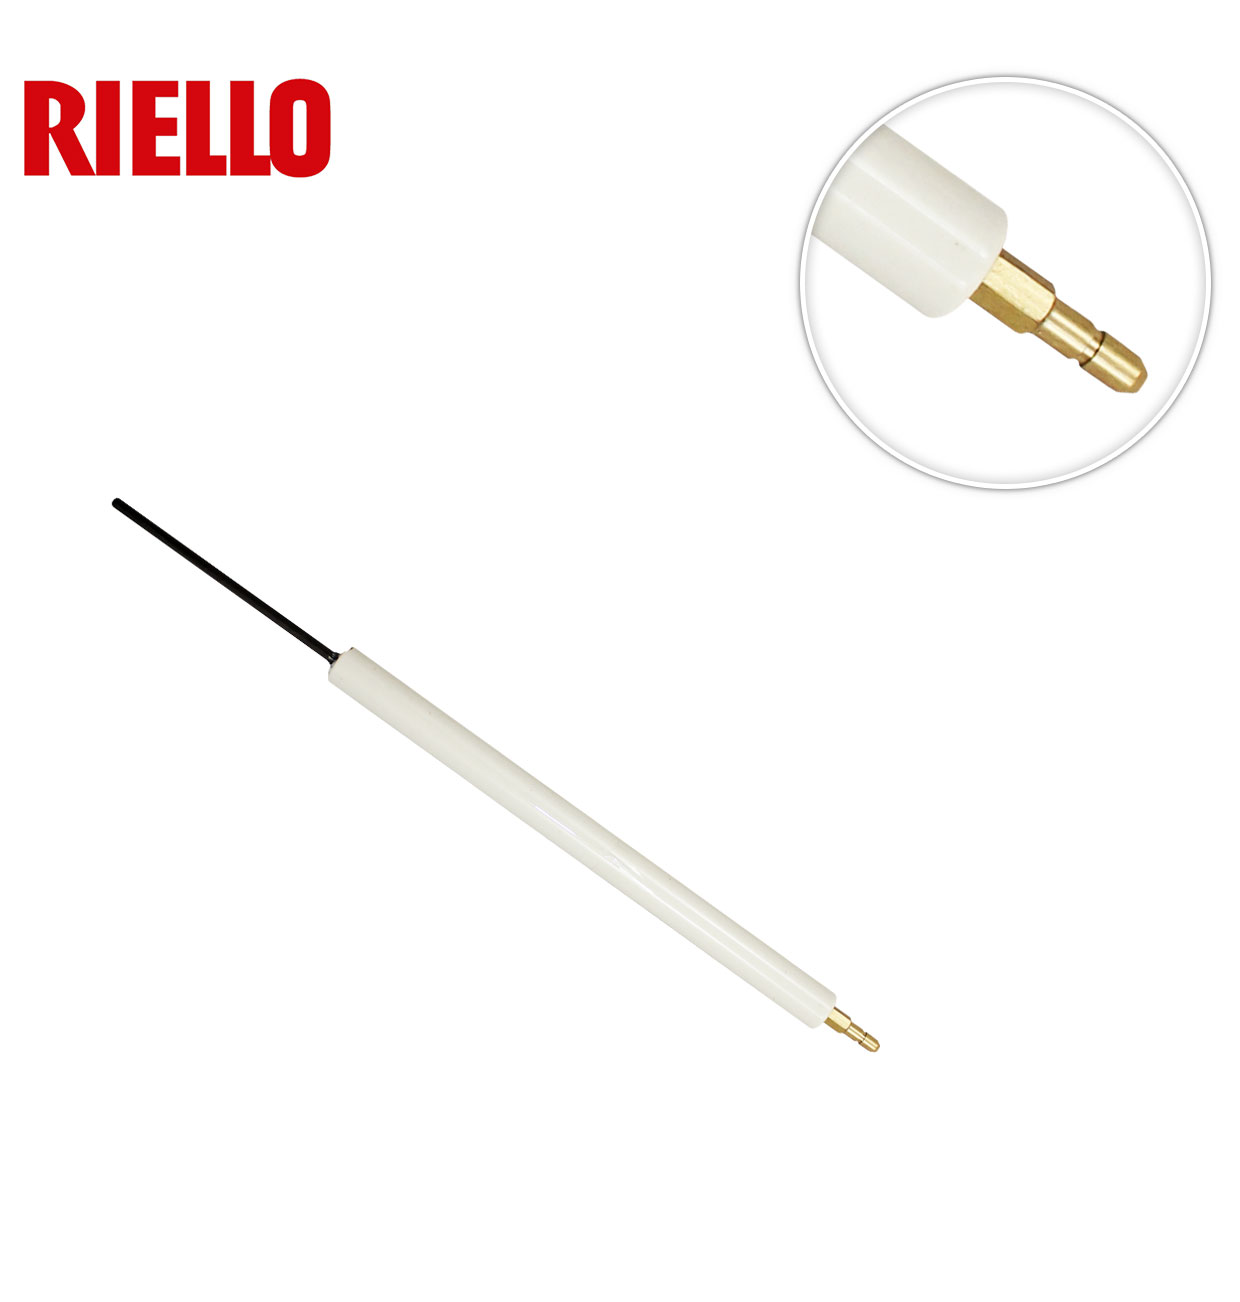 40GS20 IONISATION ELECTRODE RIELLO 3006709